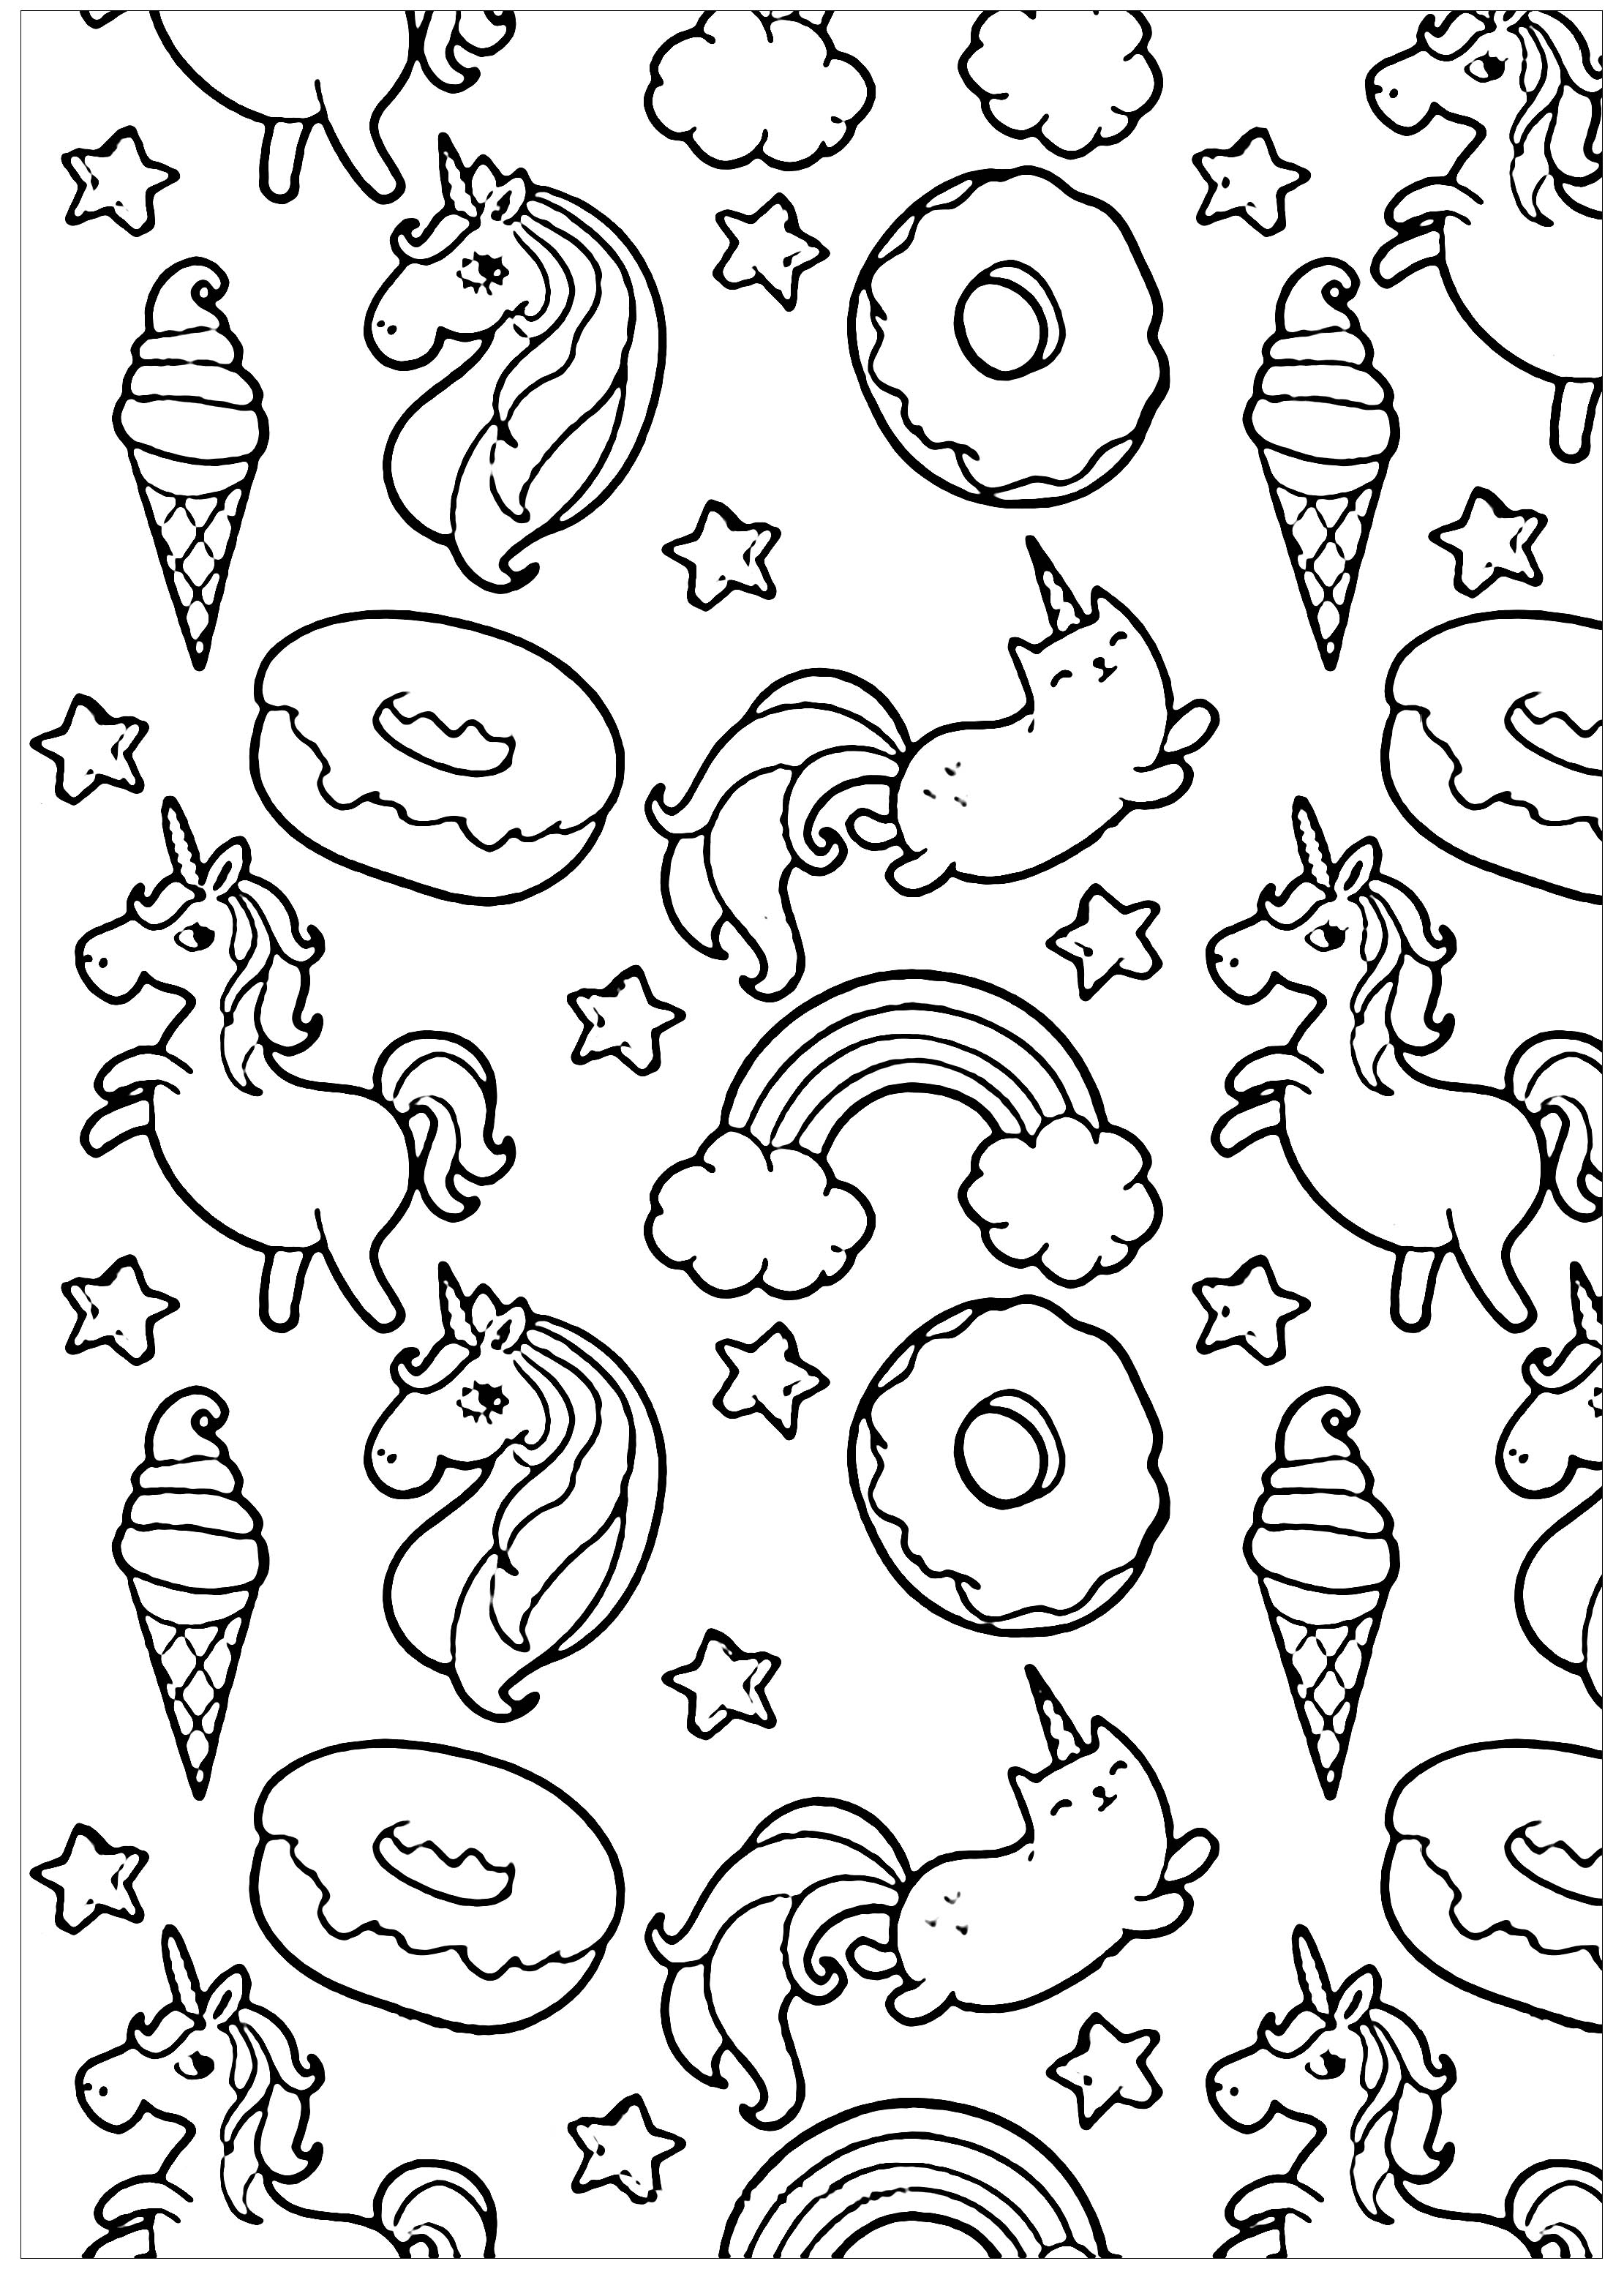 Donut 8 Coloring Pages